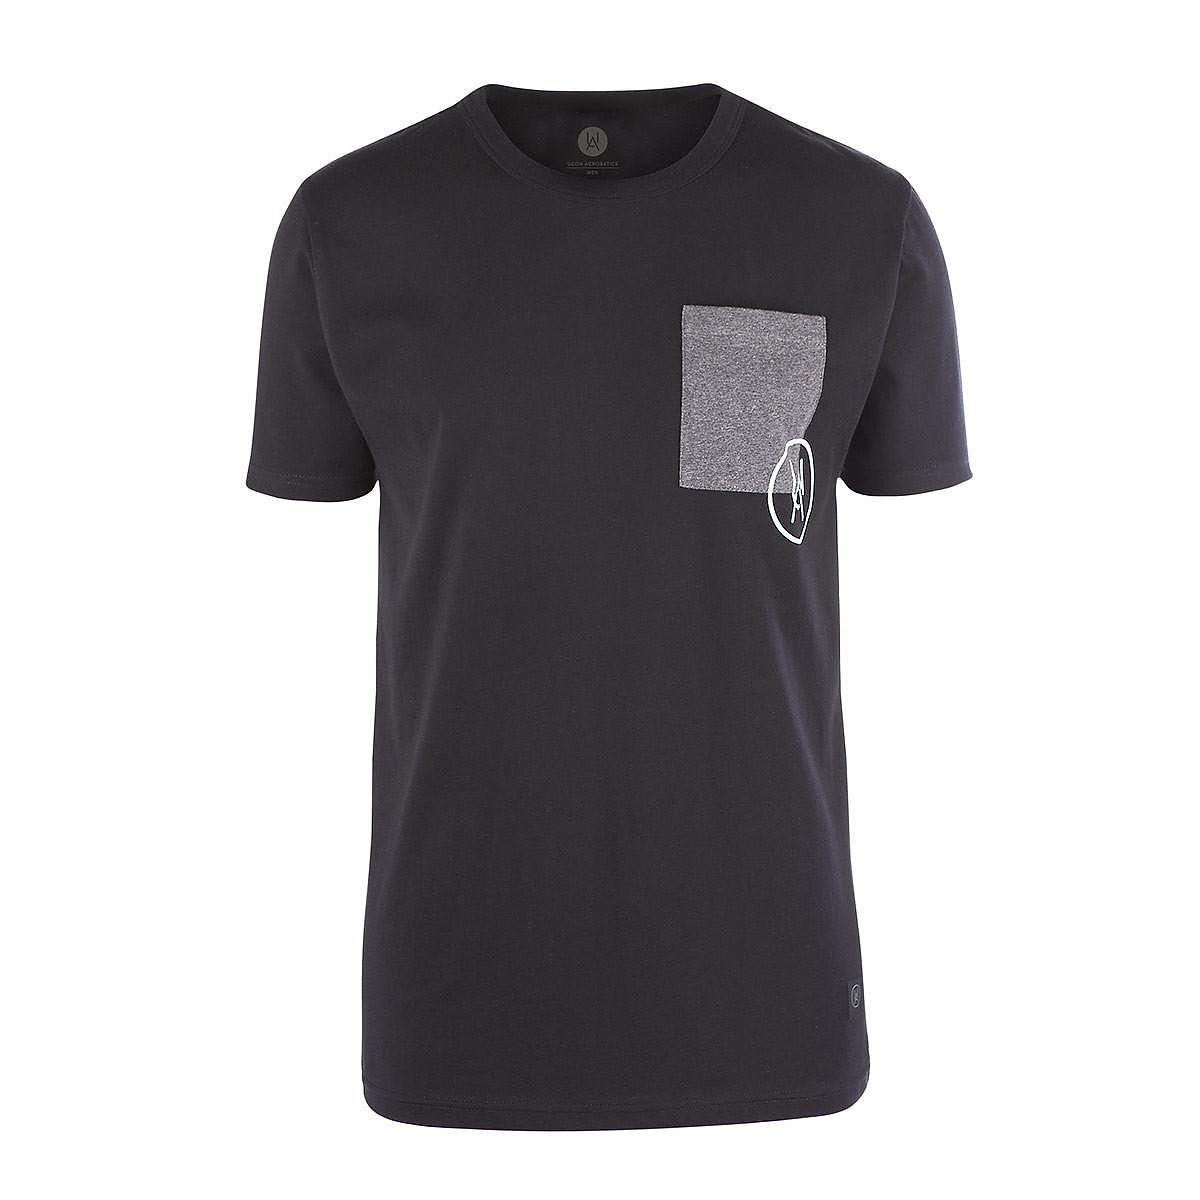 Minimal modern T-Shirts by Ucon Acrobatics. - Design Is This